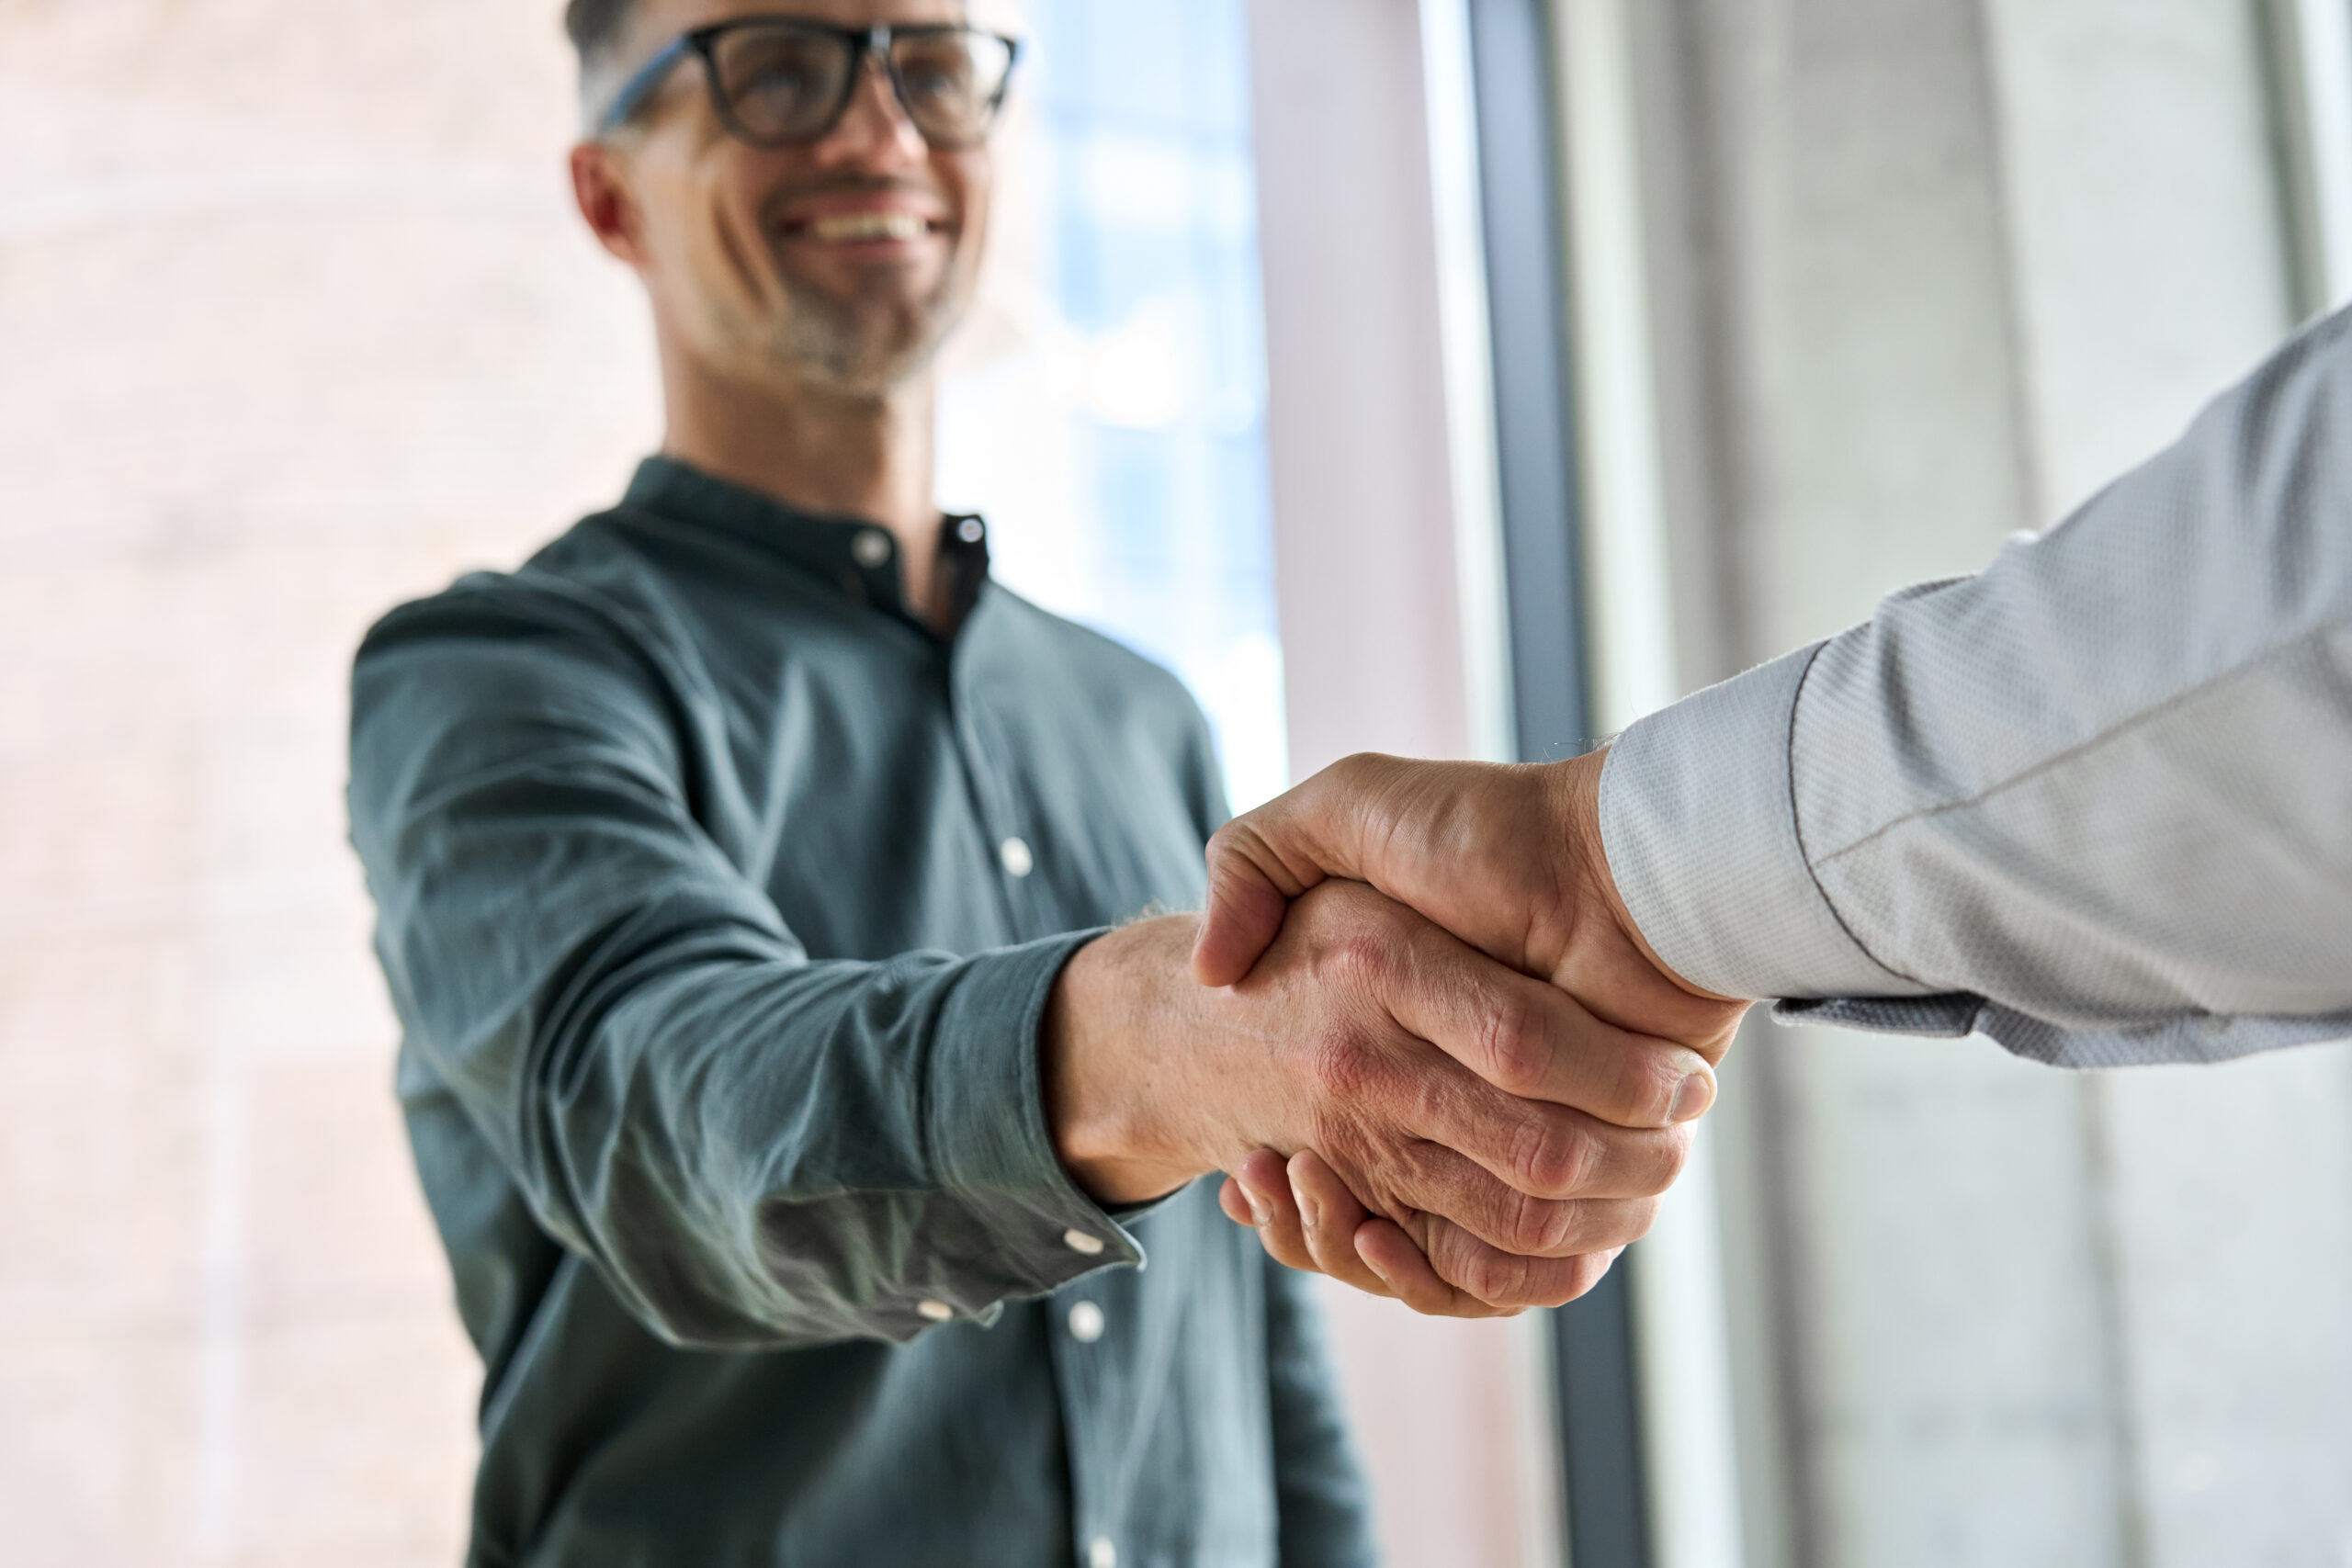 Two professionals shaking hands in a formal office setting, symbolising a successful business deal.